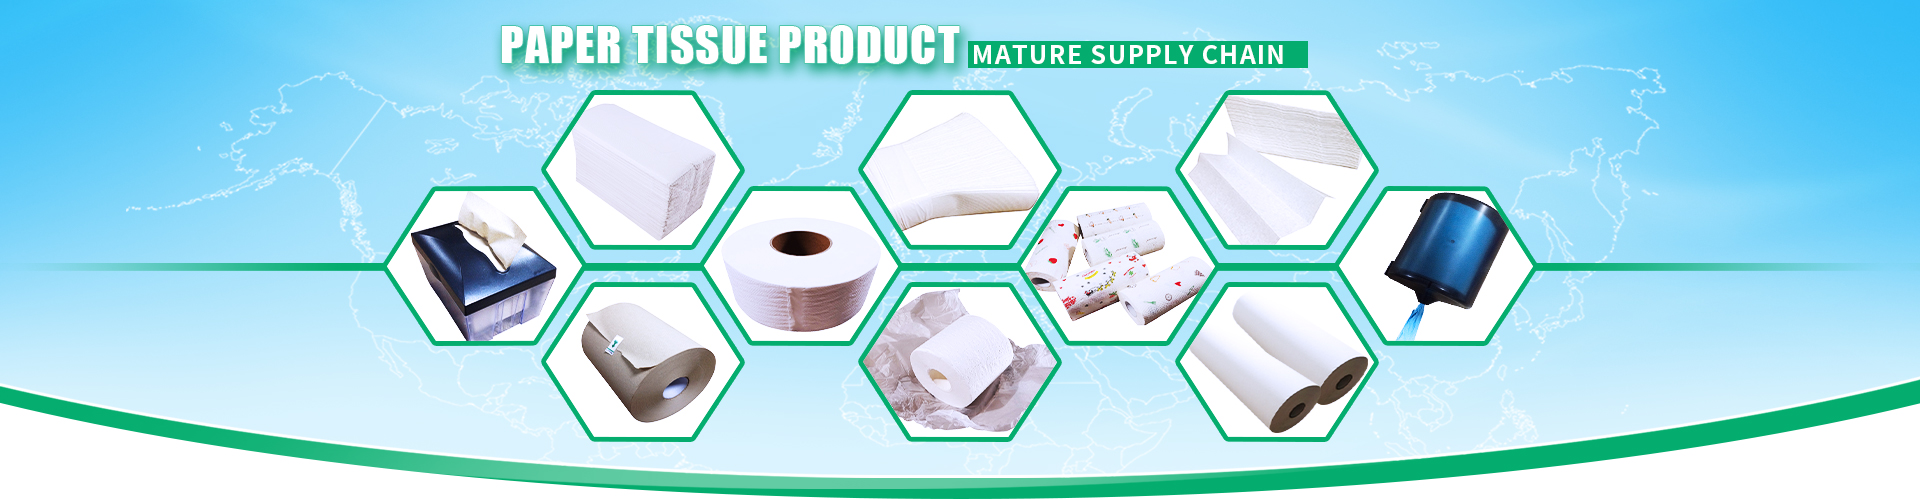 Tail Goods - Chaozhou Soft Paper Products Co.,Ltd